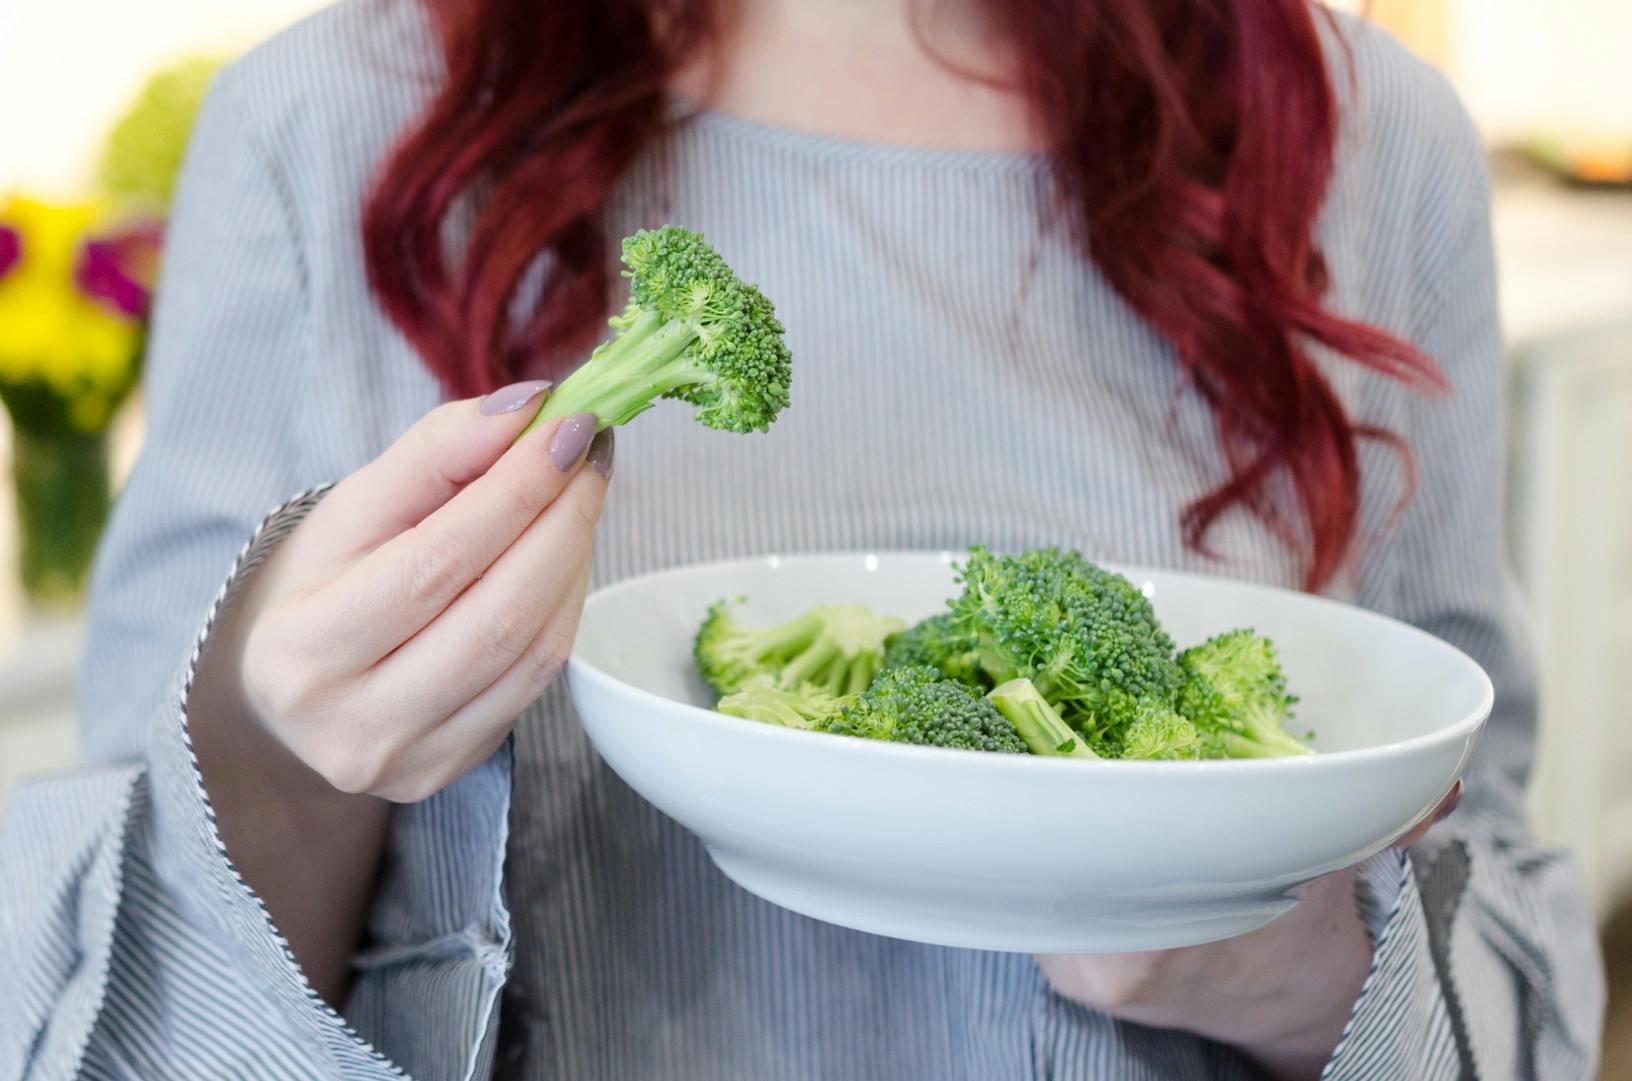 Before you go out to dinner or a party, eat two cups of raw vegetables to avoid overeating unhealthy food.